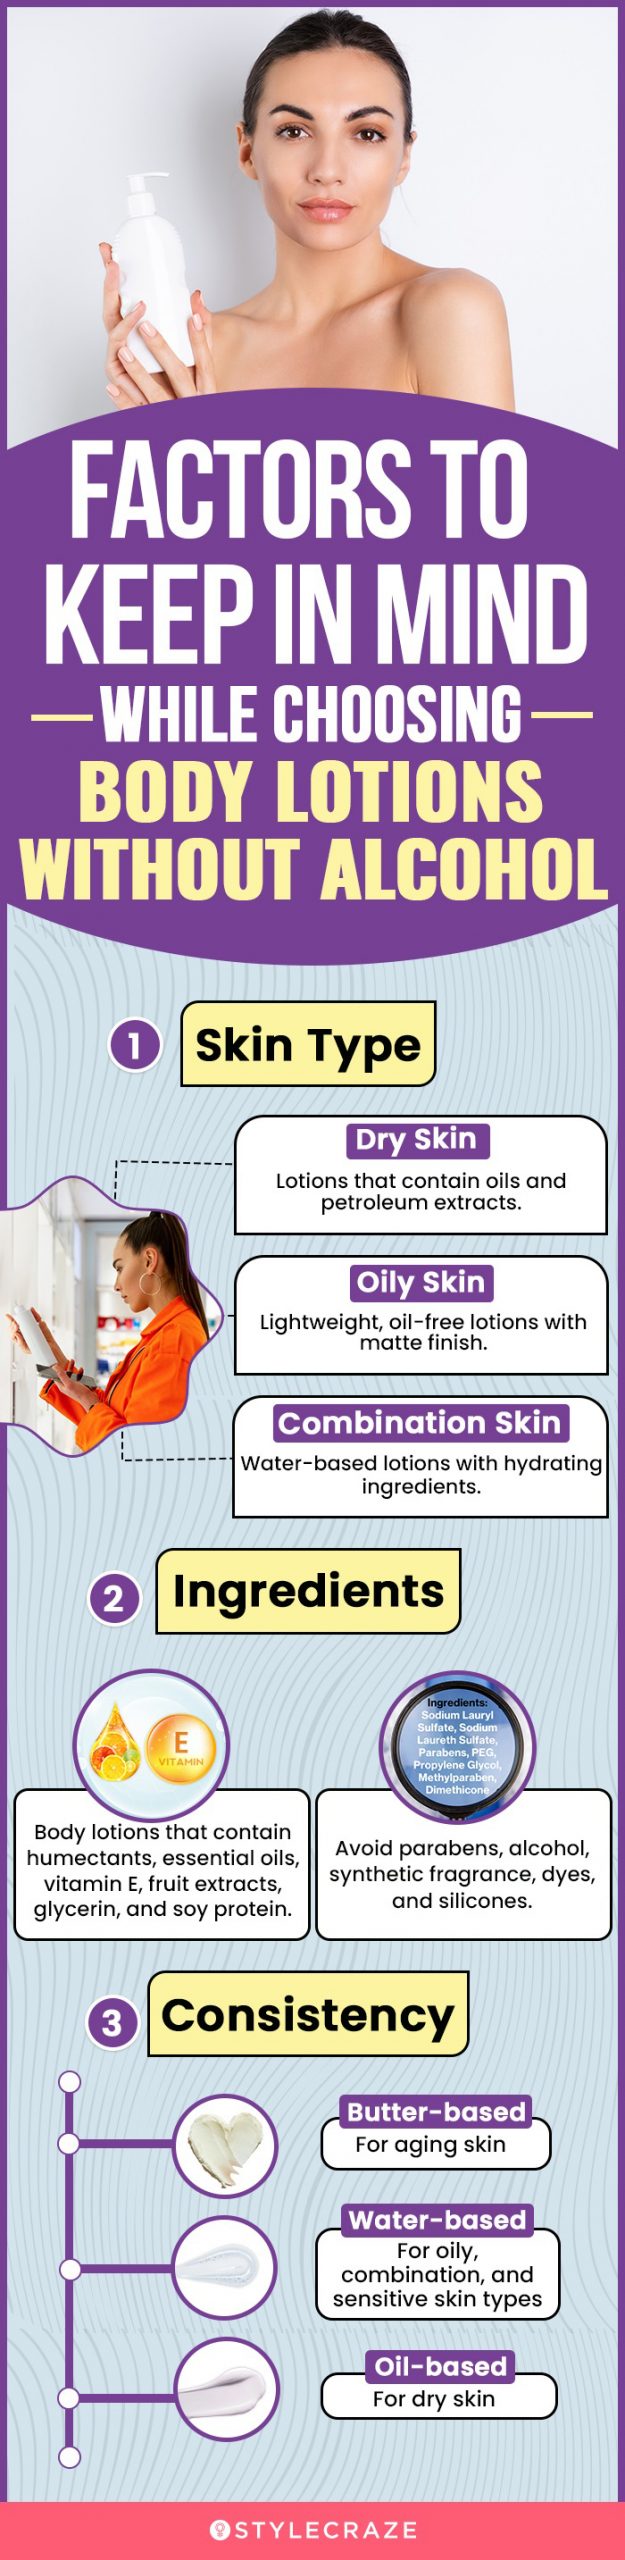 Factors To Keep In Mind To Choose The Best Body Lotion Without Alcohol [infographic]